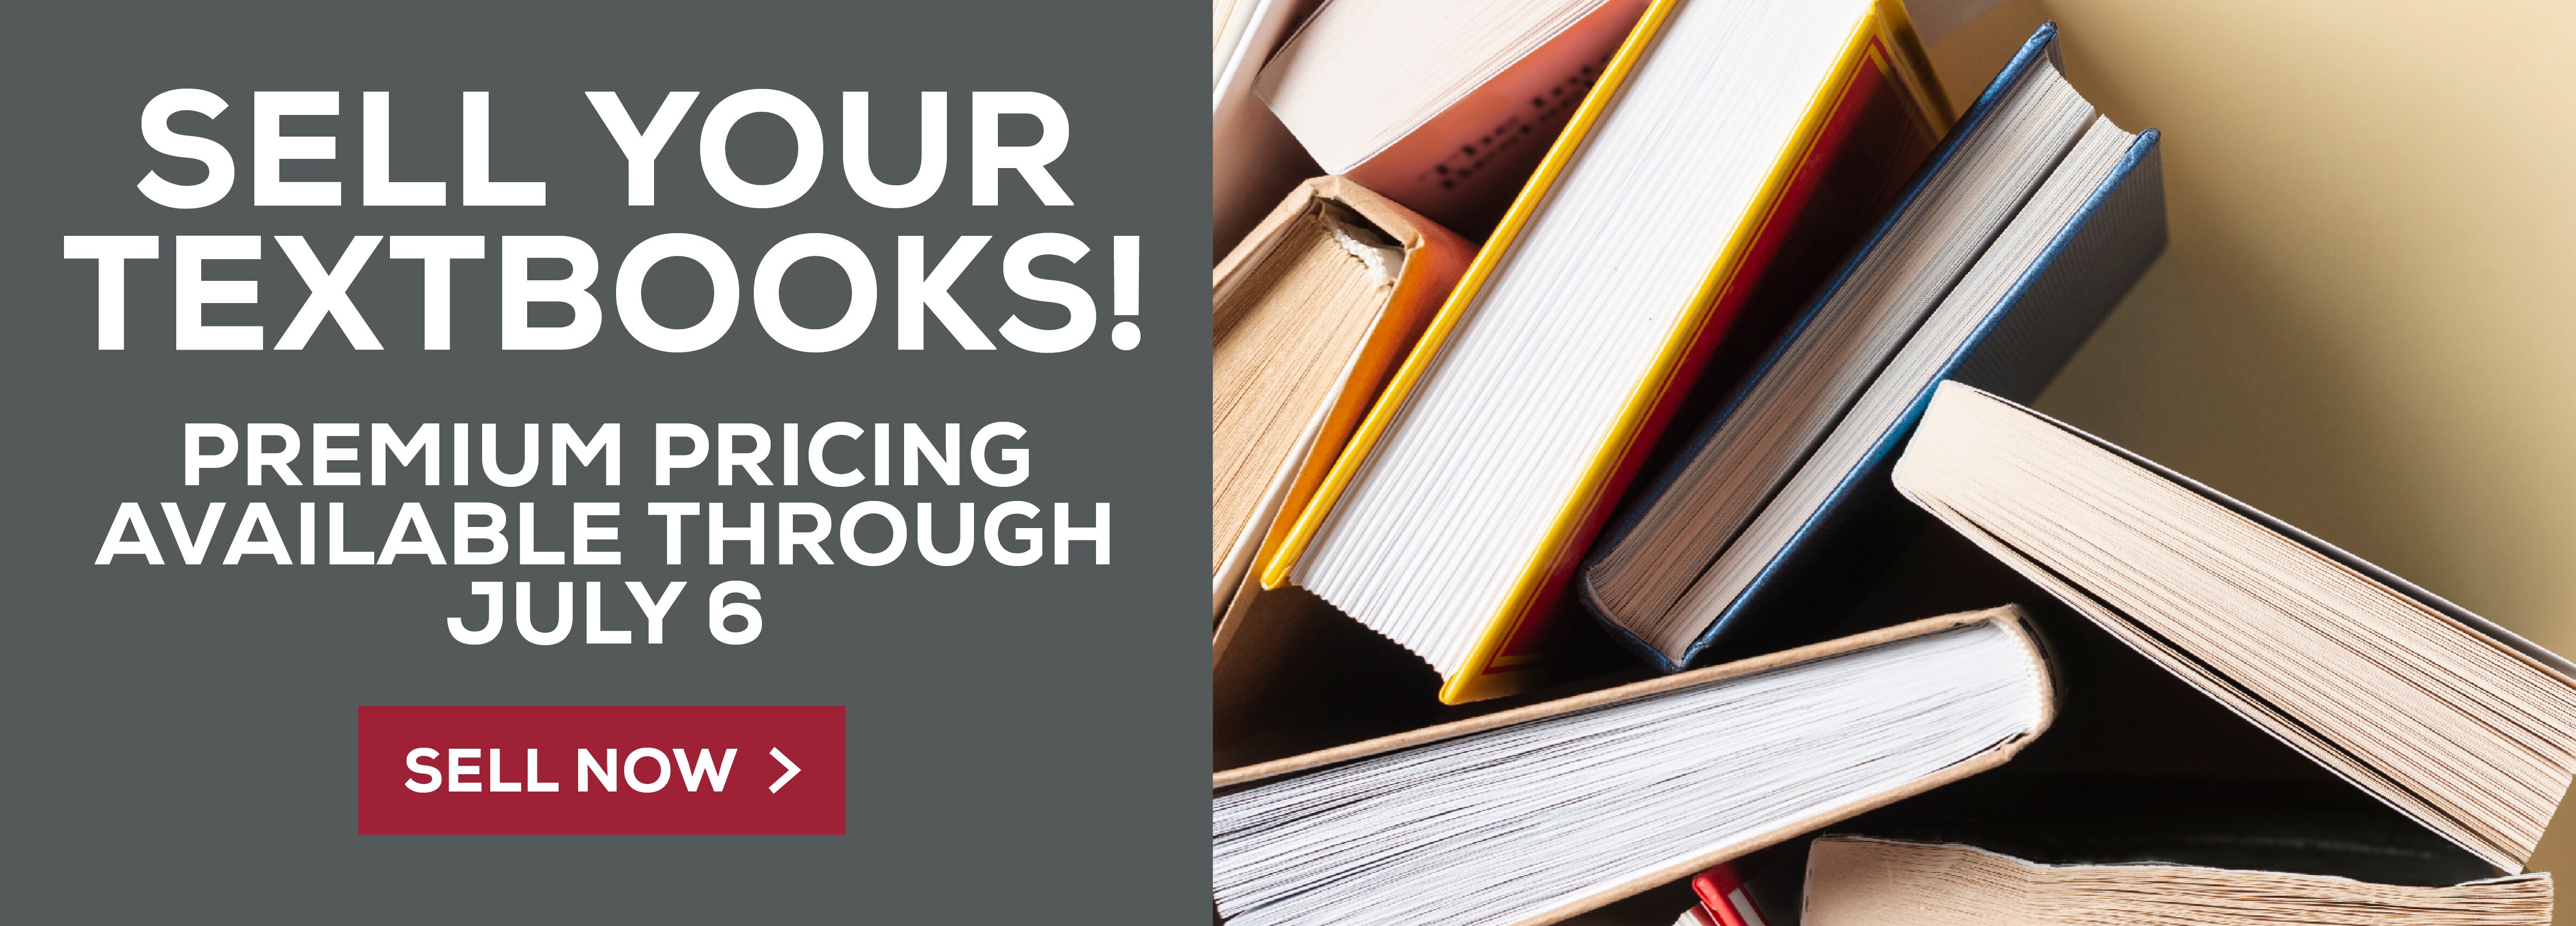 Sell Your Textbooks! Premium pricing available through July 6. Sell Now!					